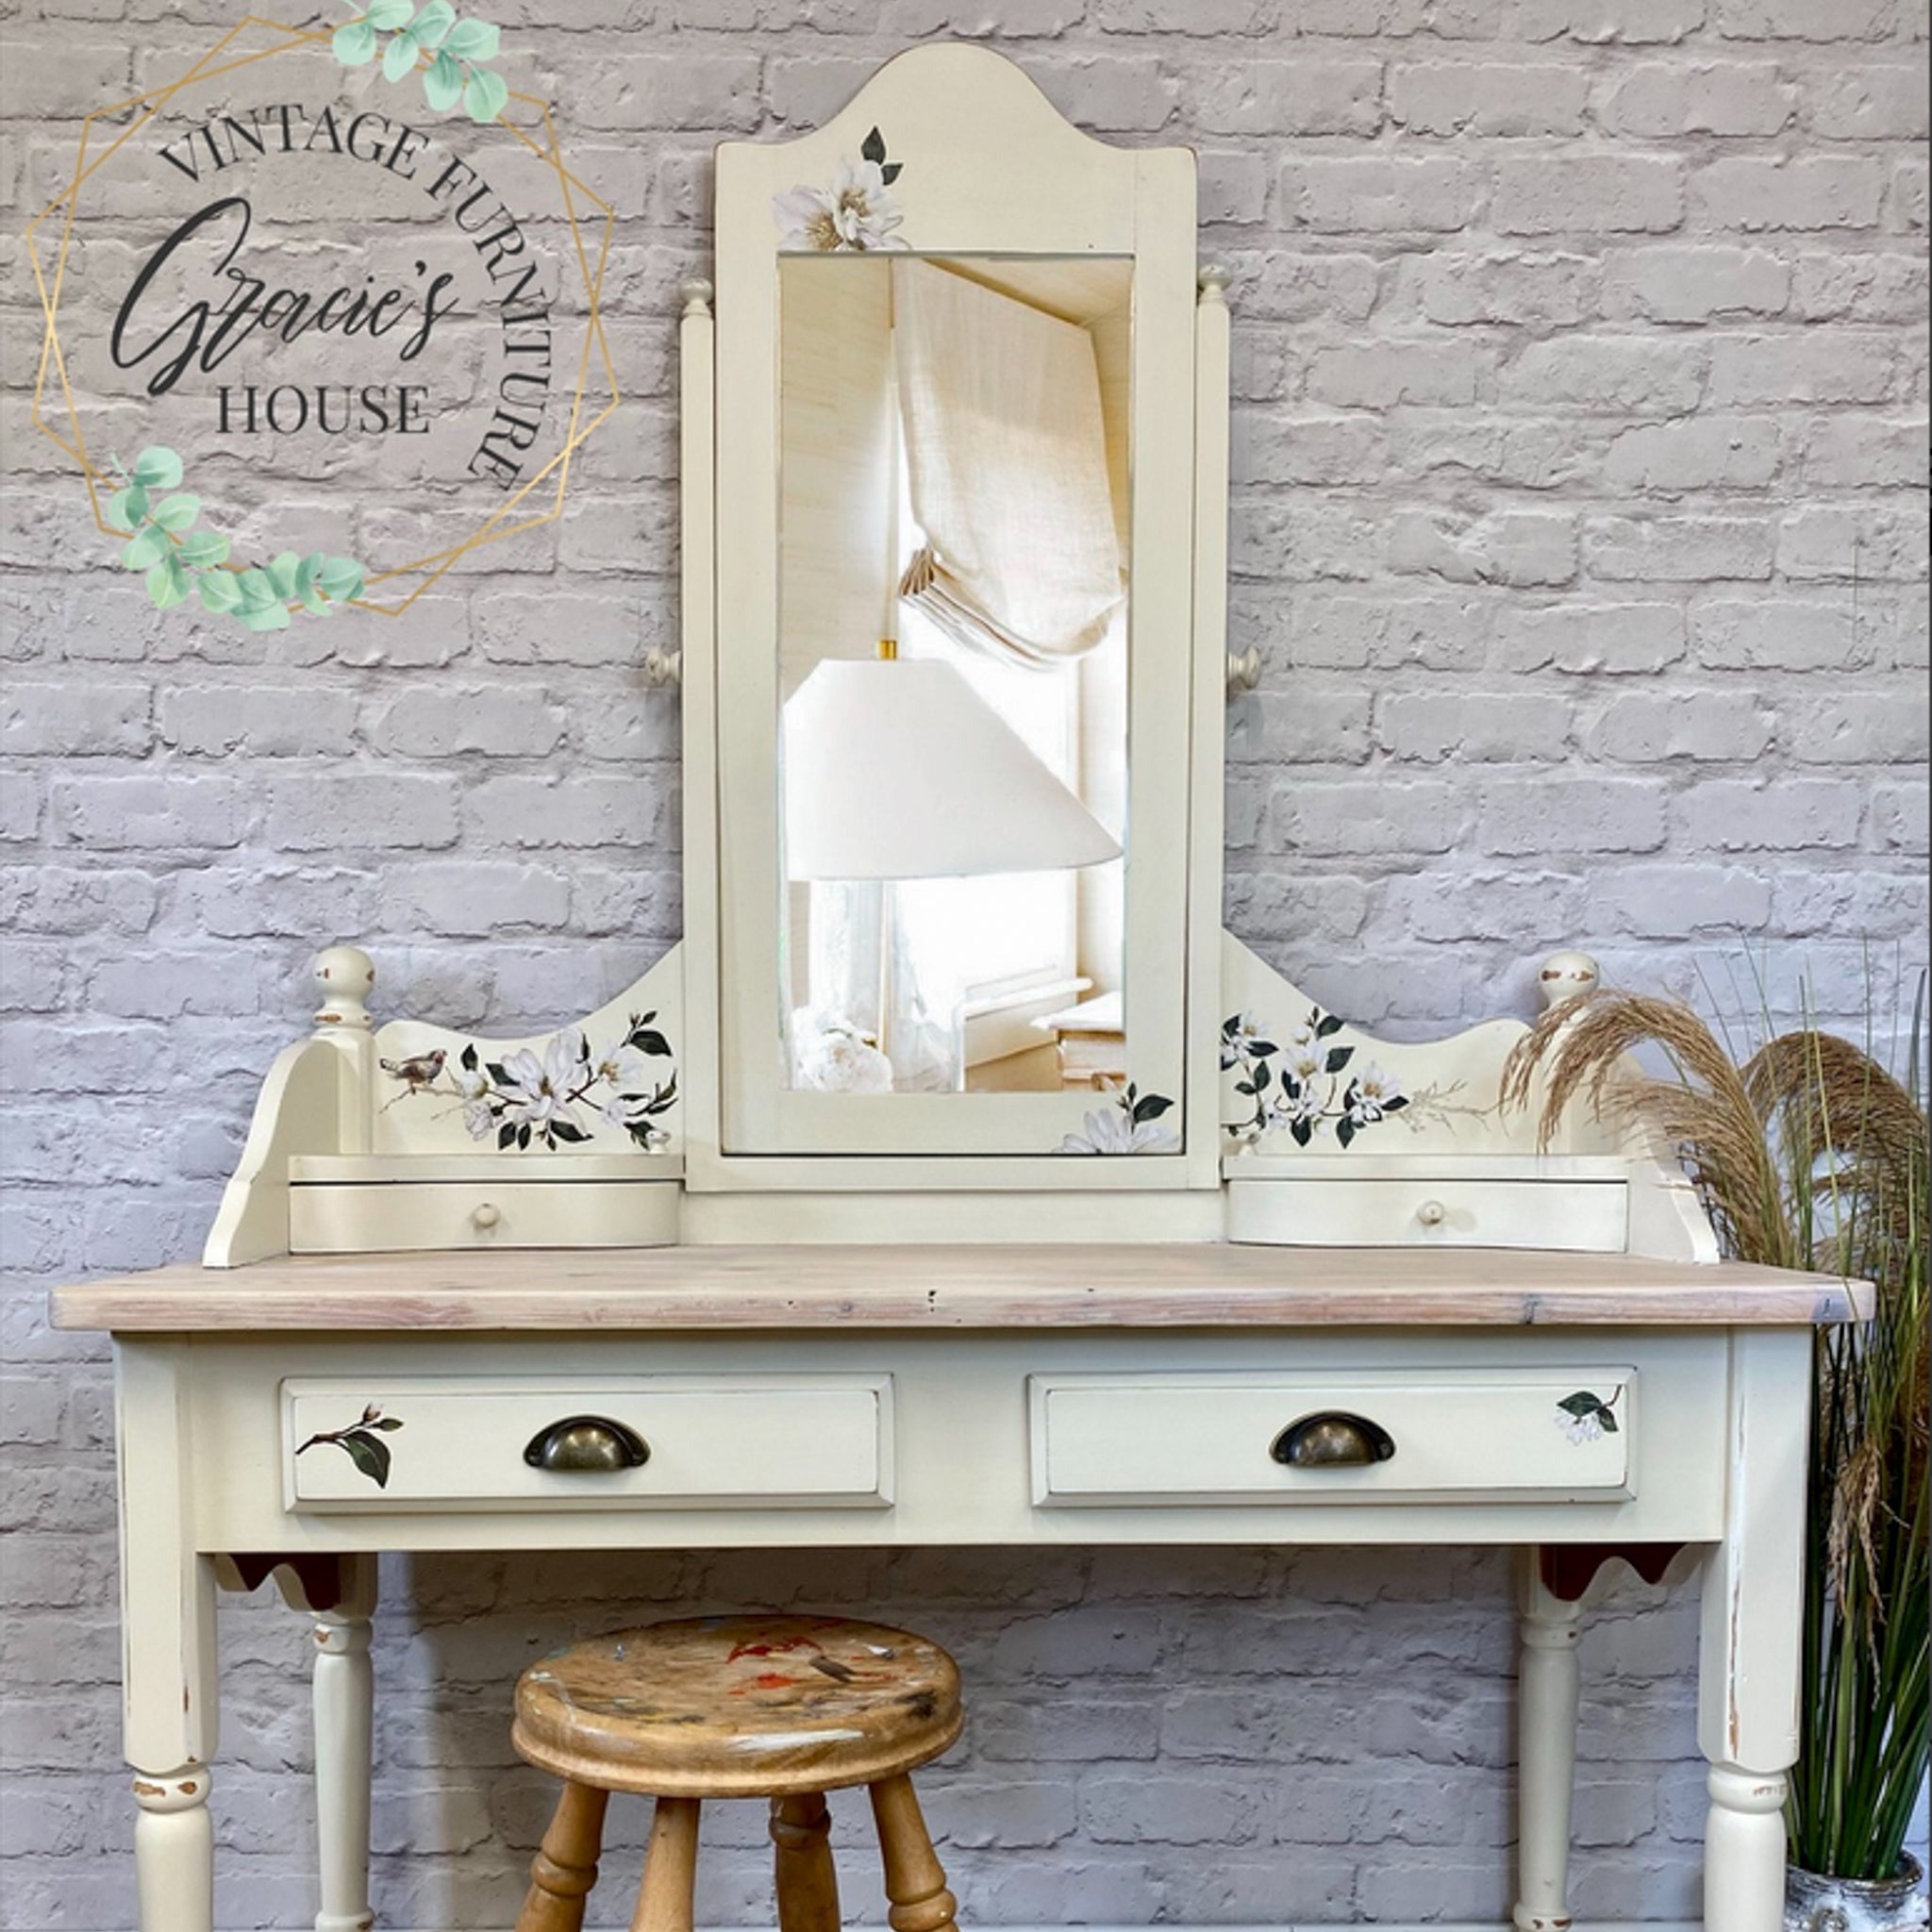 A vintage vanity refurbished by Gracie's House Vintage Furniture is painted a light cream and features ReDesign with Prima's White Magnolia small transfer on it.